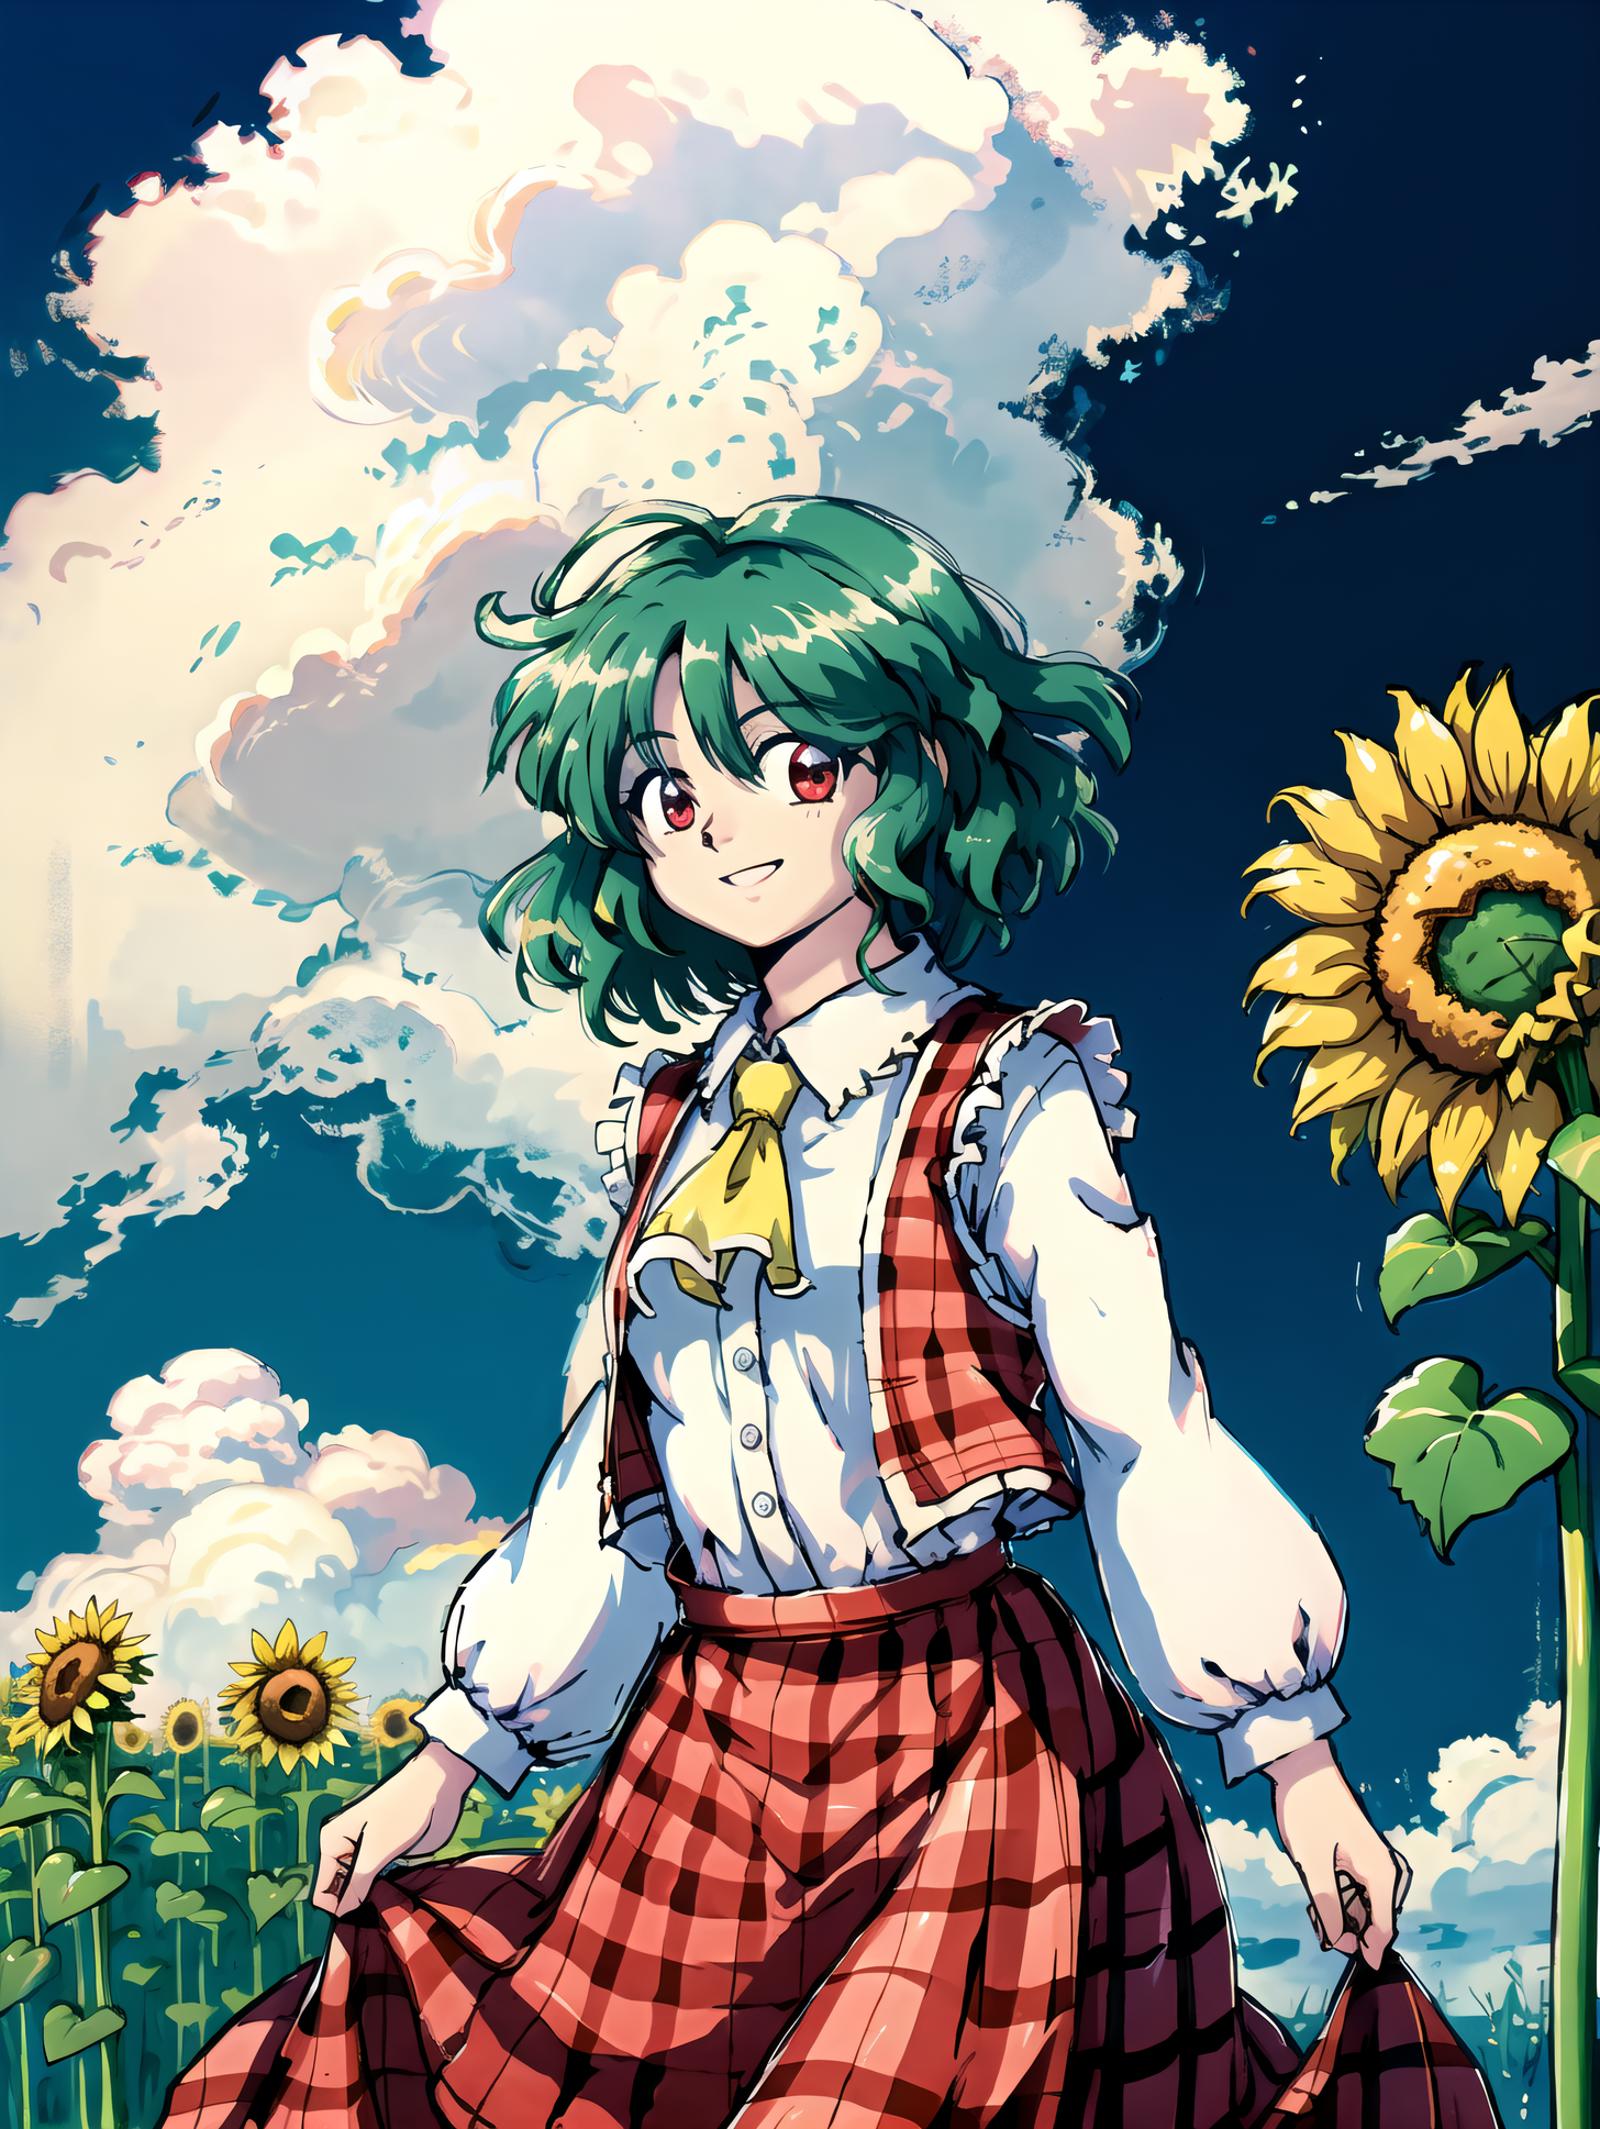 Touhou Project PC-98 Games (Style) image by dizzyspin